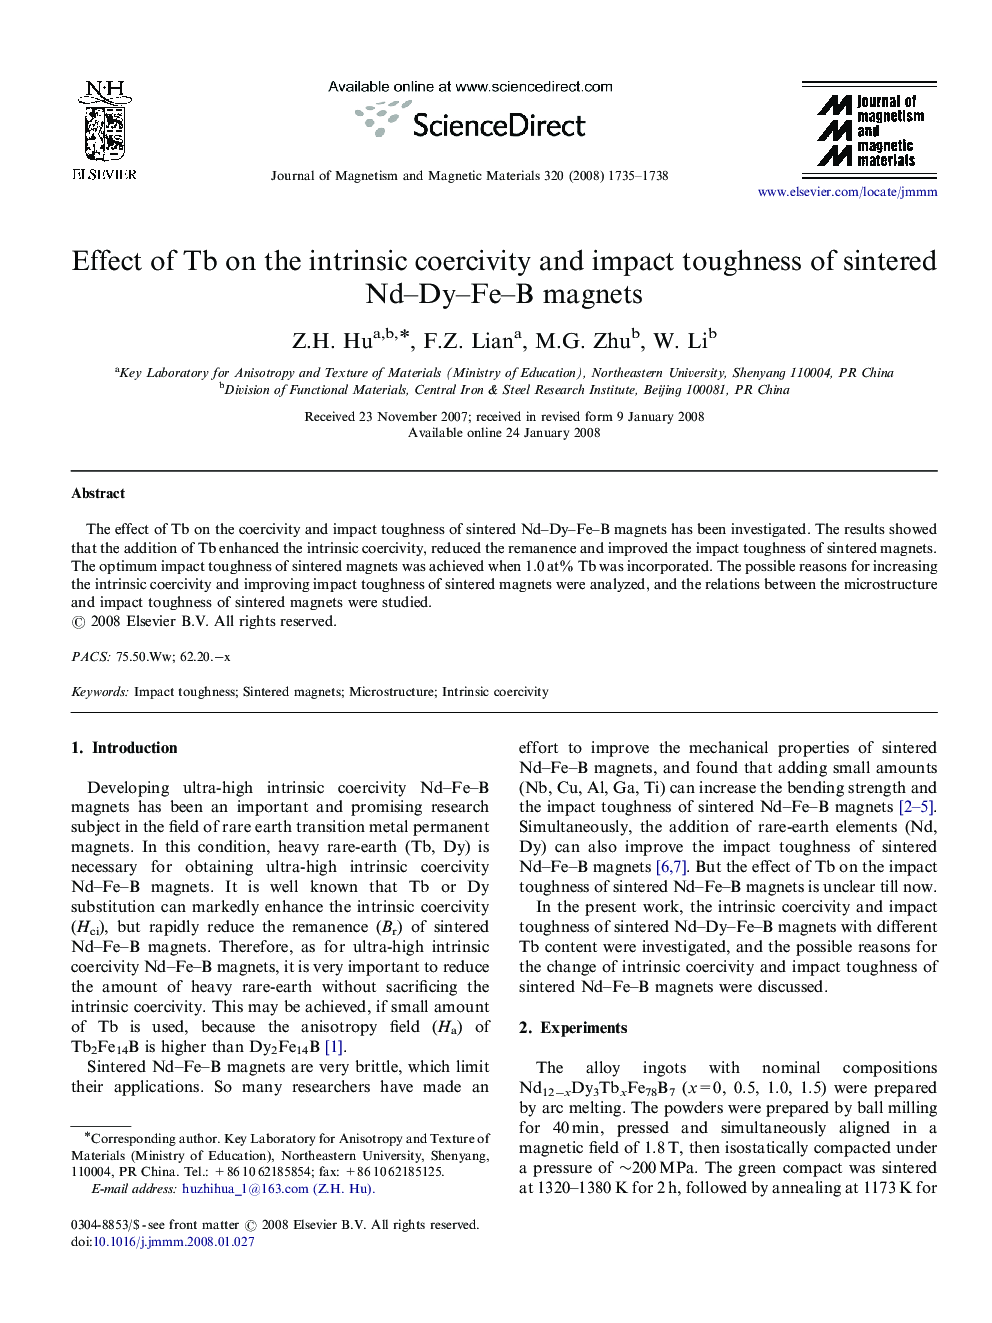 Effect of Tb on the intrinsic coercivity and impact toughness of sintered Nd-Dy-Fe-B magnets